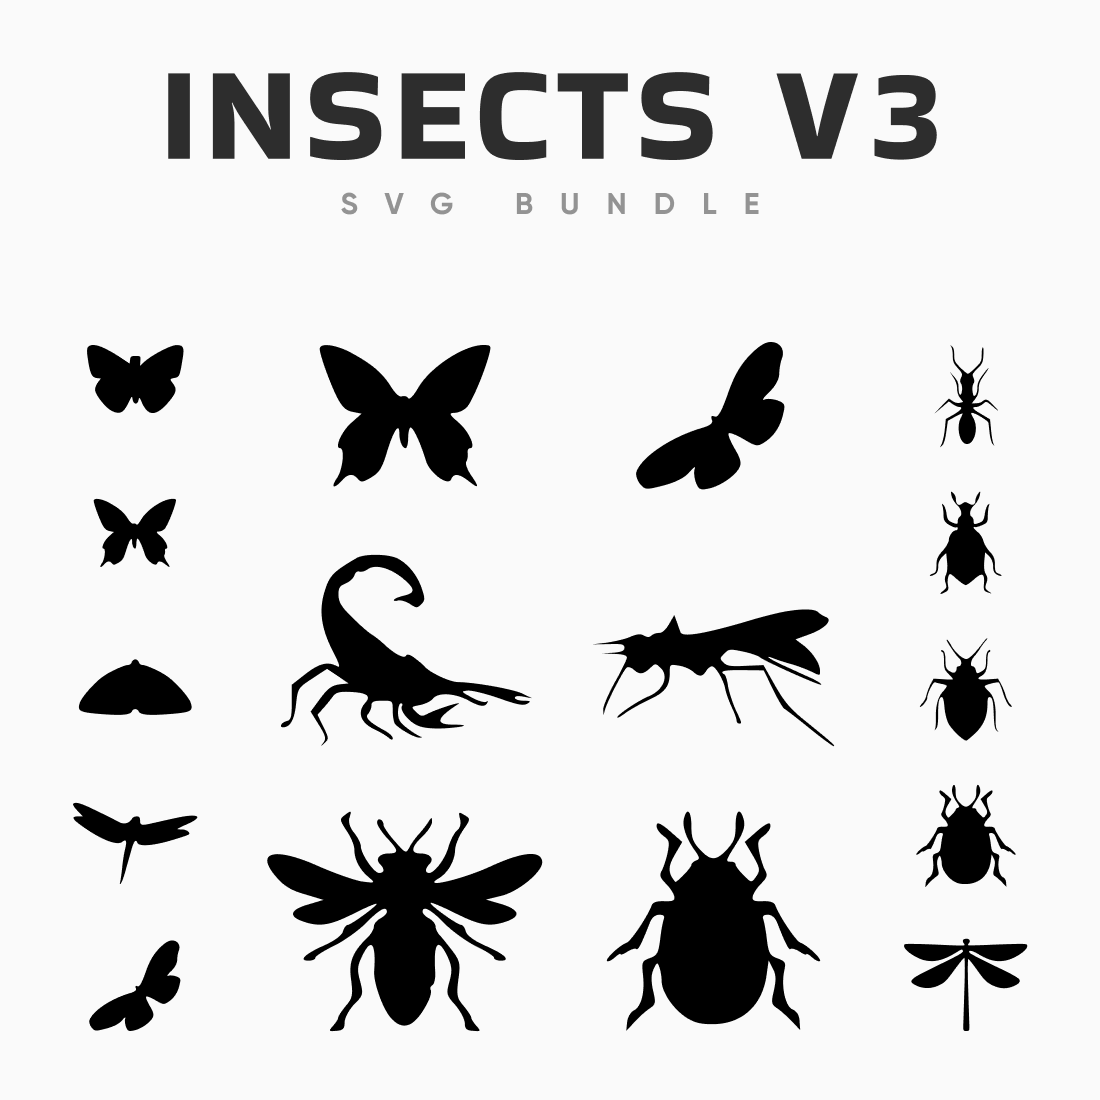 Insect silhouettes v3 svg bundle.